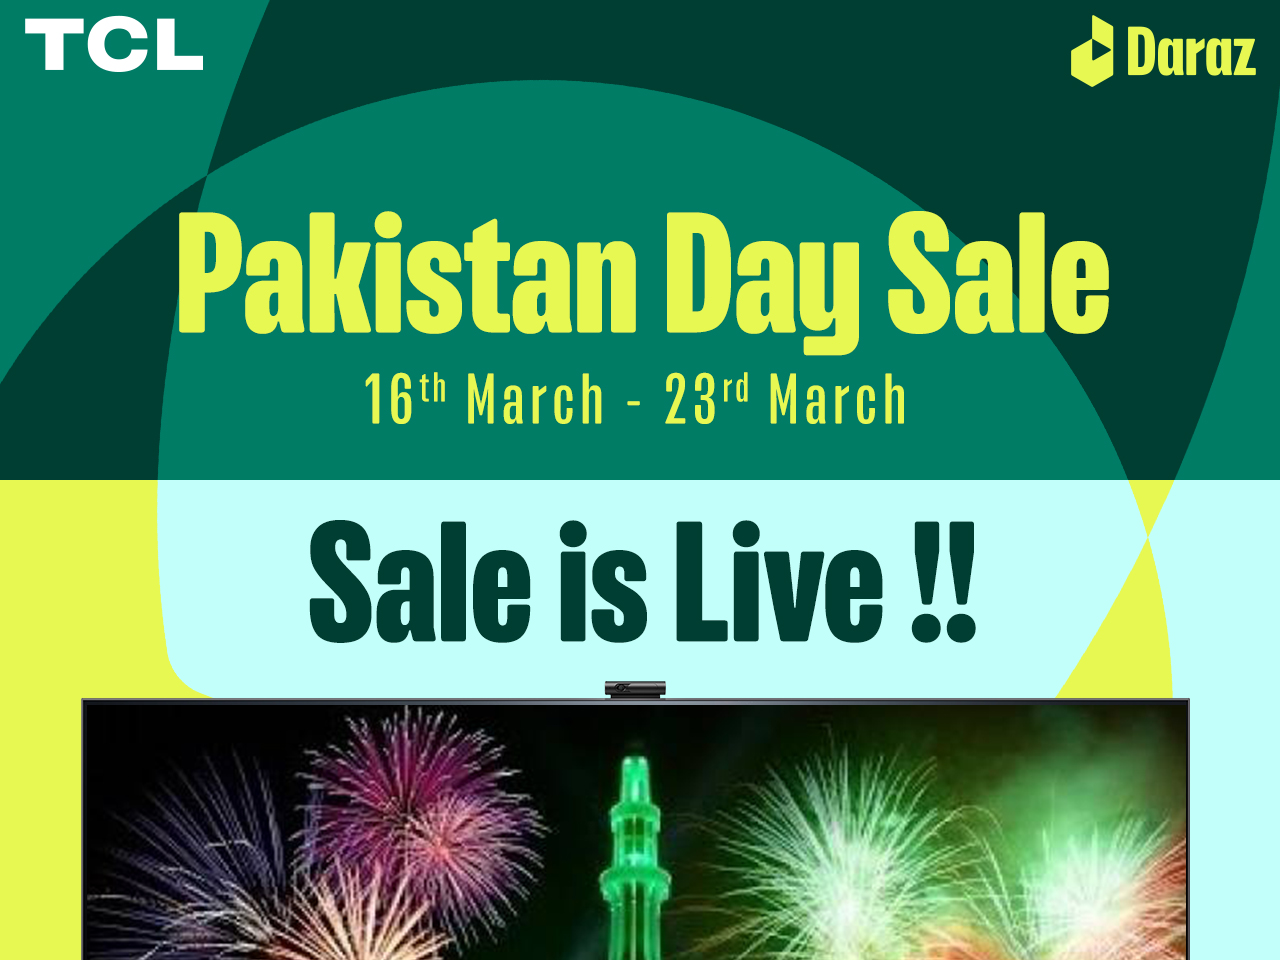 TCL to Mark Pakistan Day with Grand Sale on Daraz